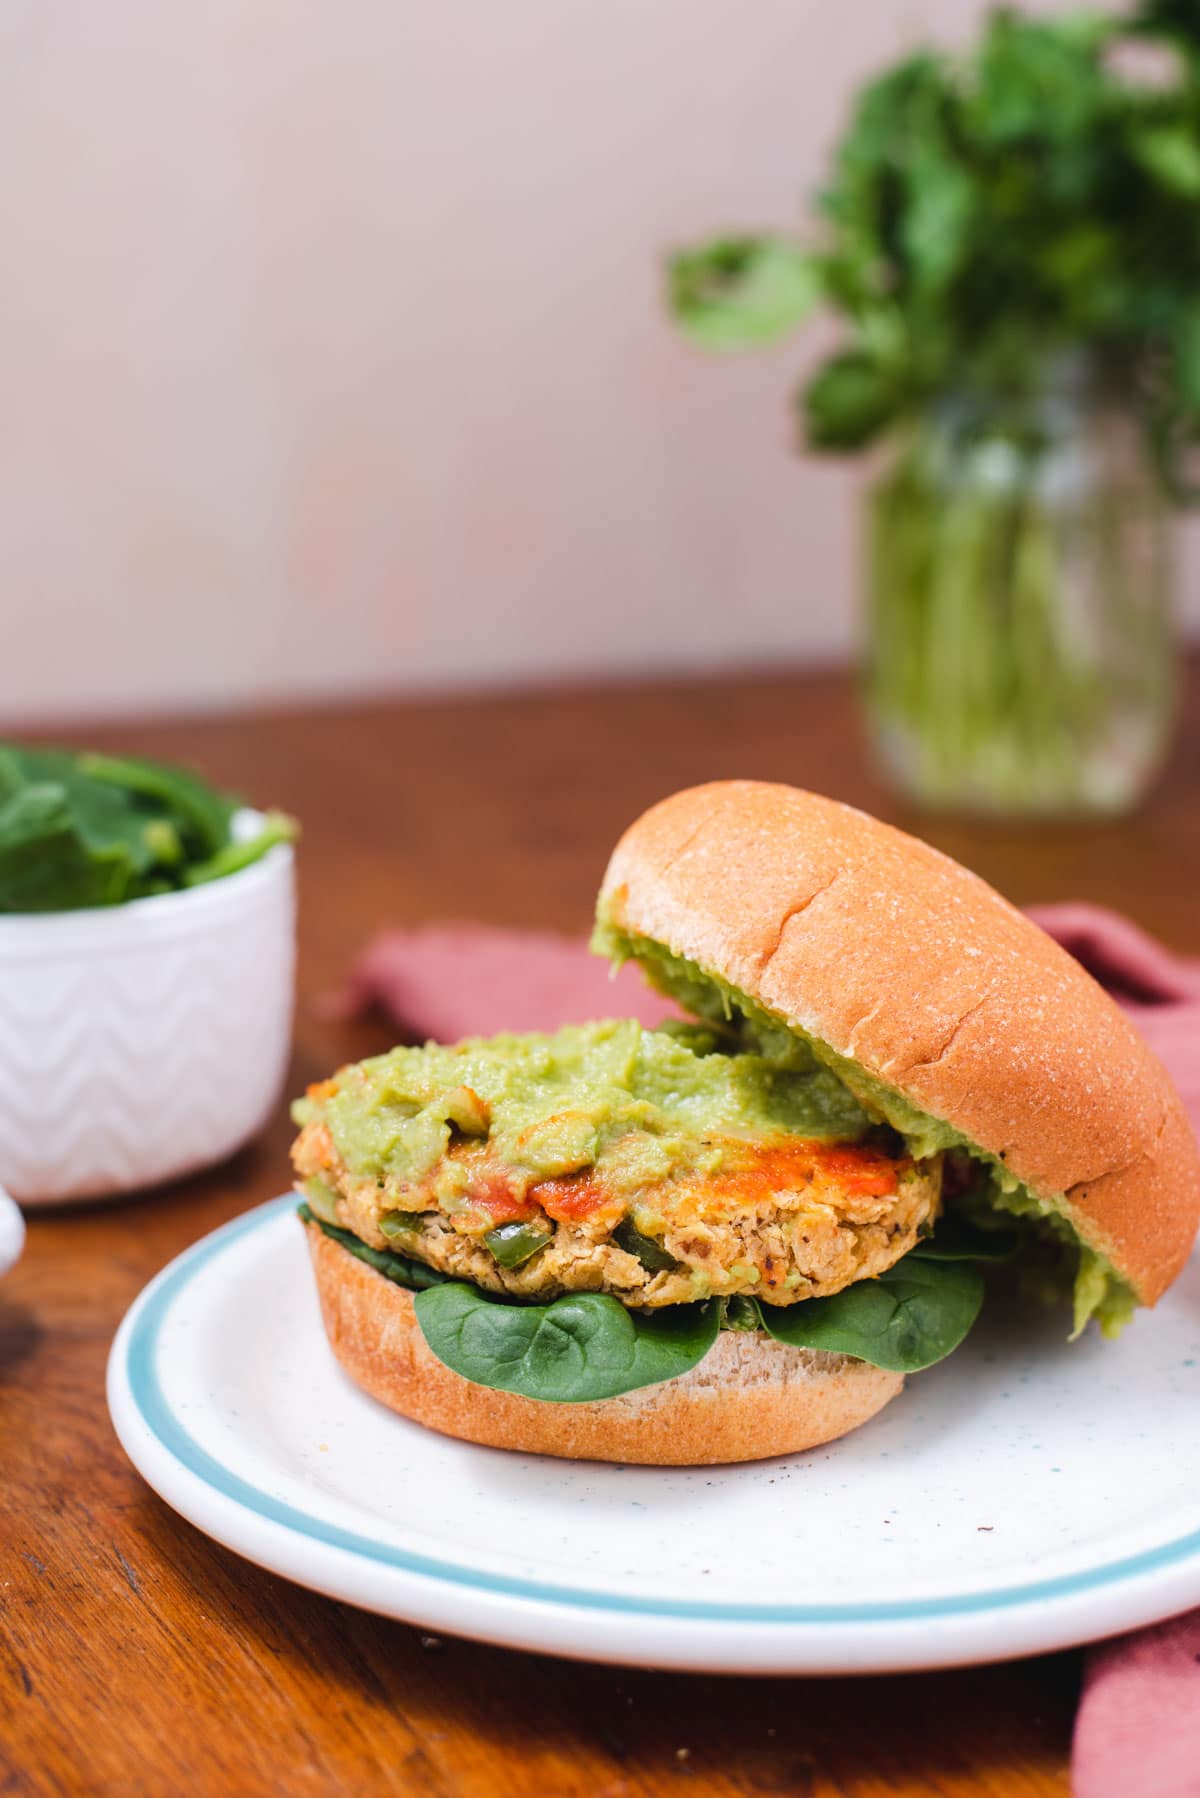 Veggie patty topped with guacamole on a bun.